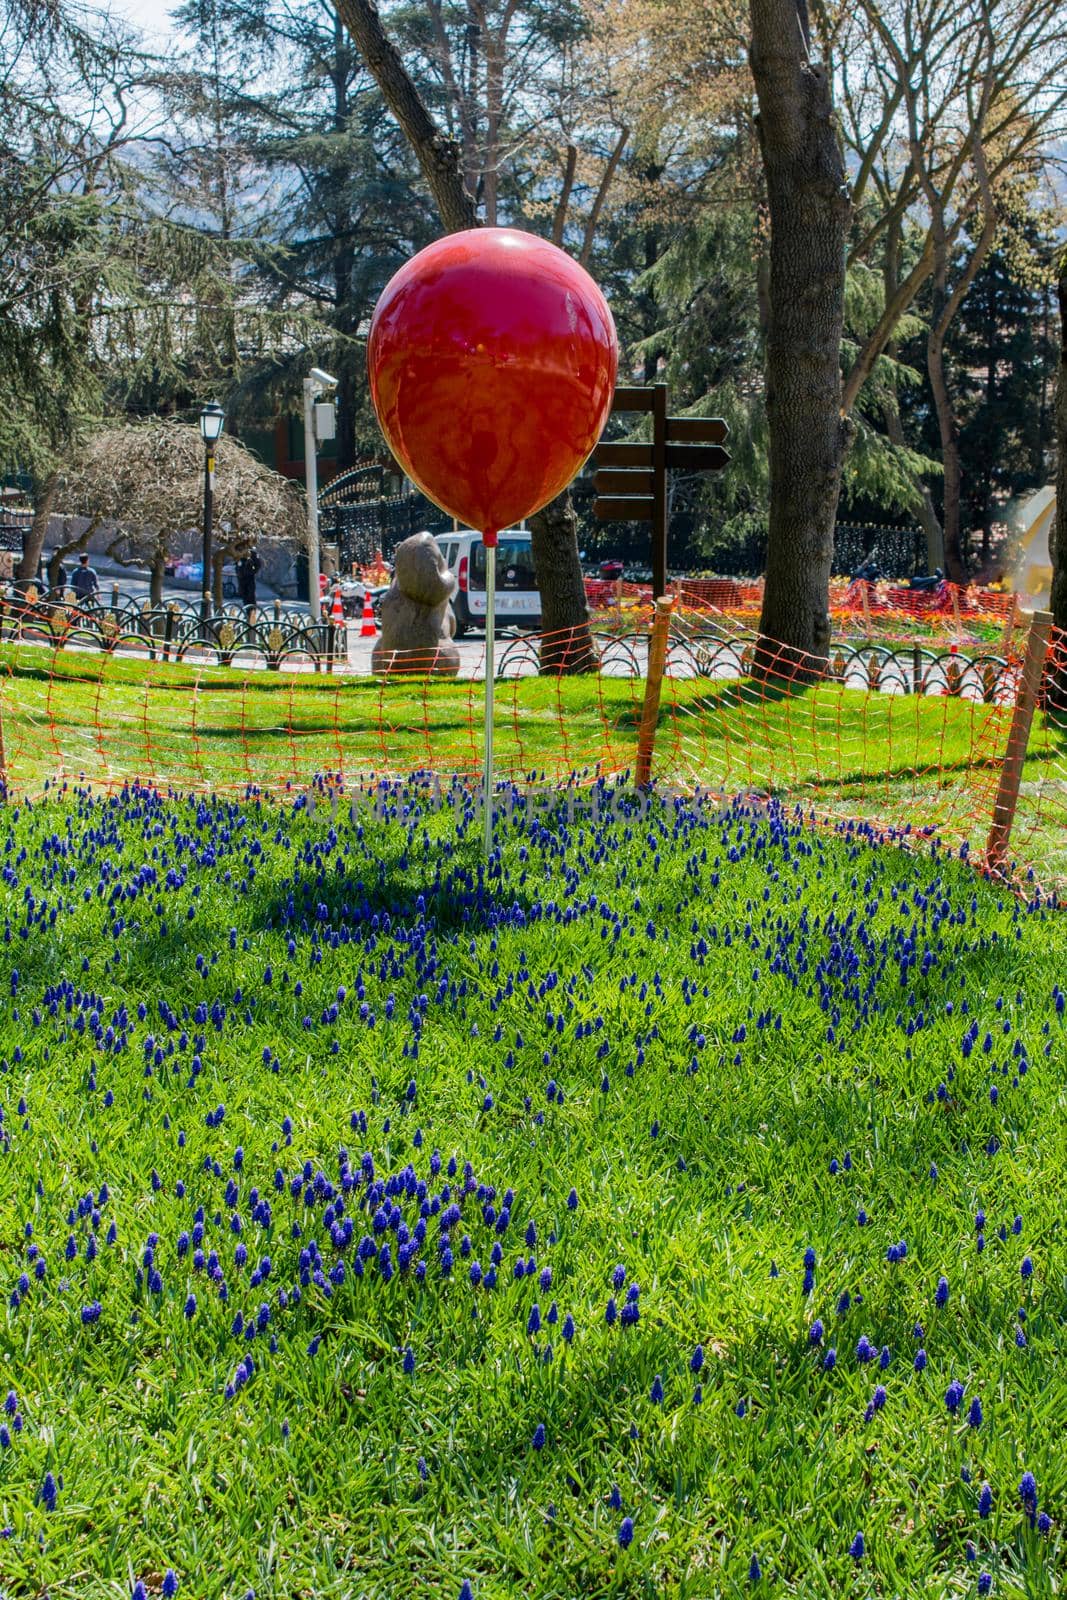 Decorative colorful balloons in the flower garden